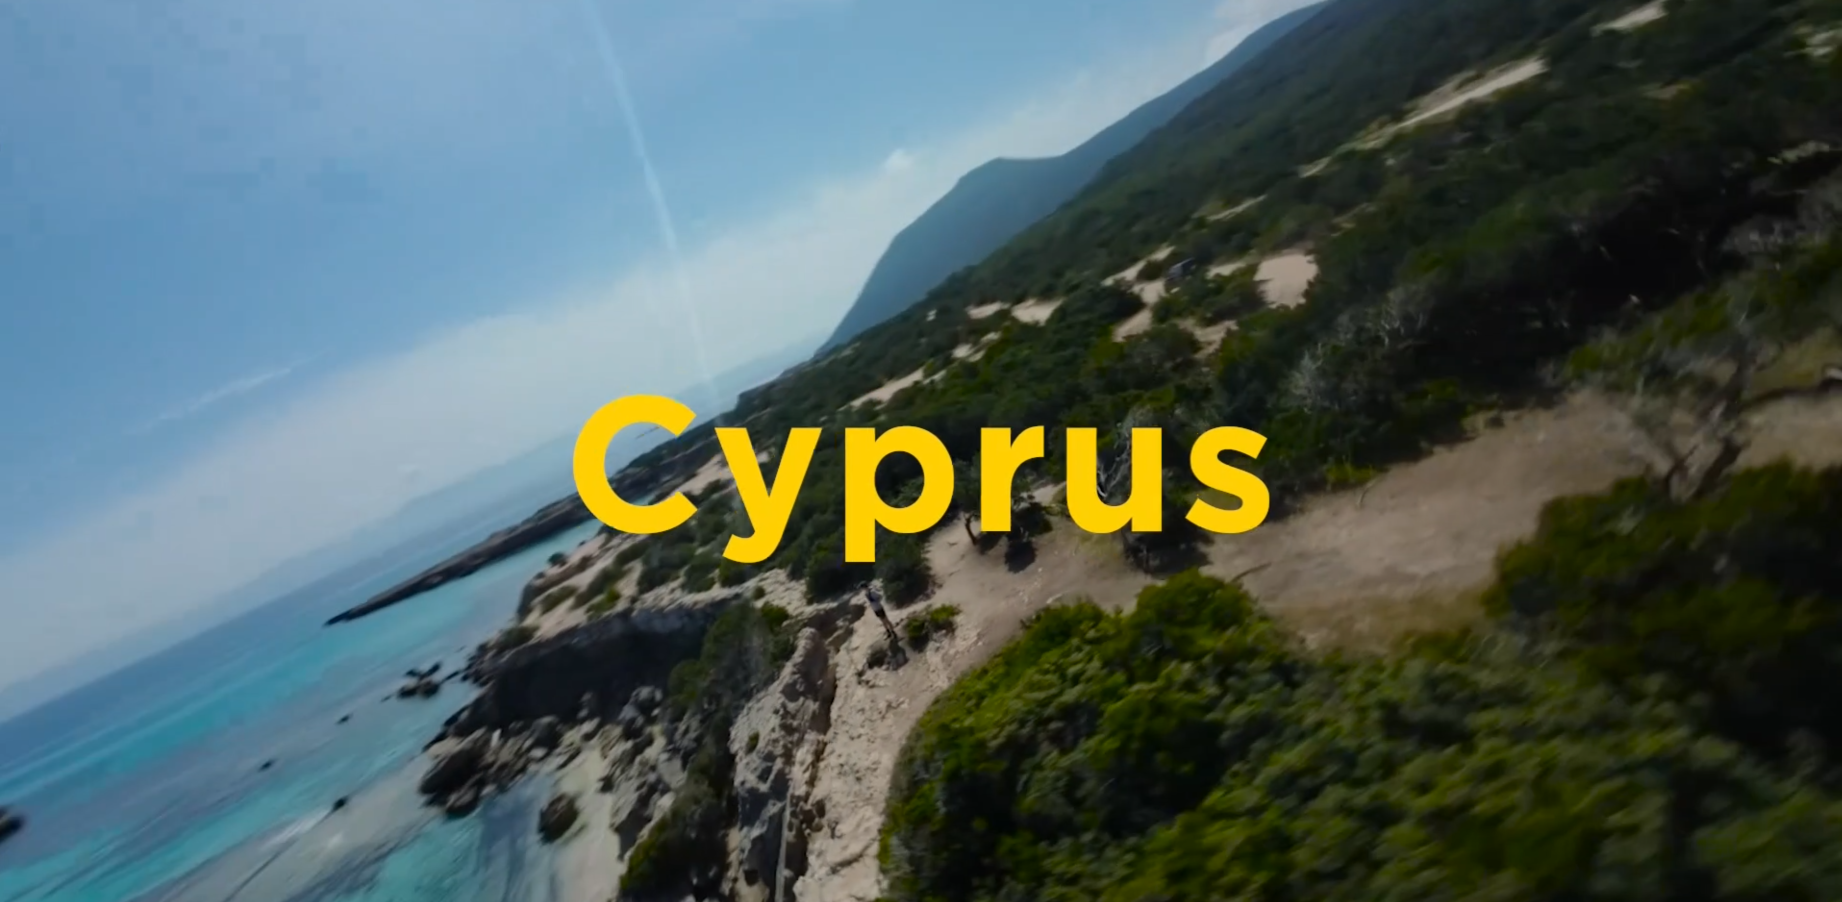 WATCH: Fall in love with Cyprus